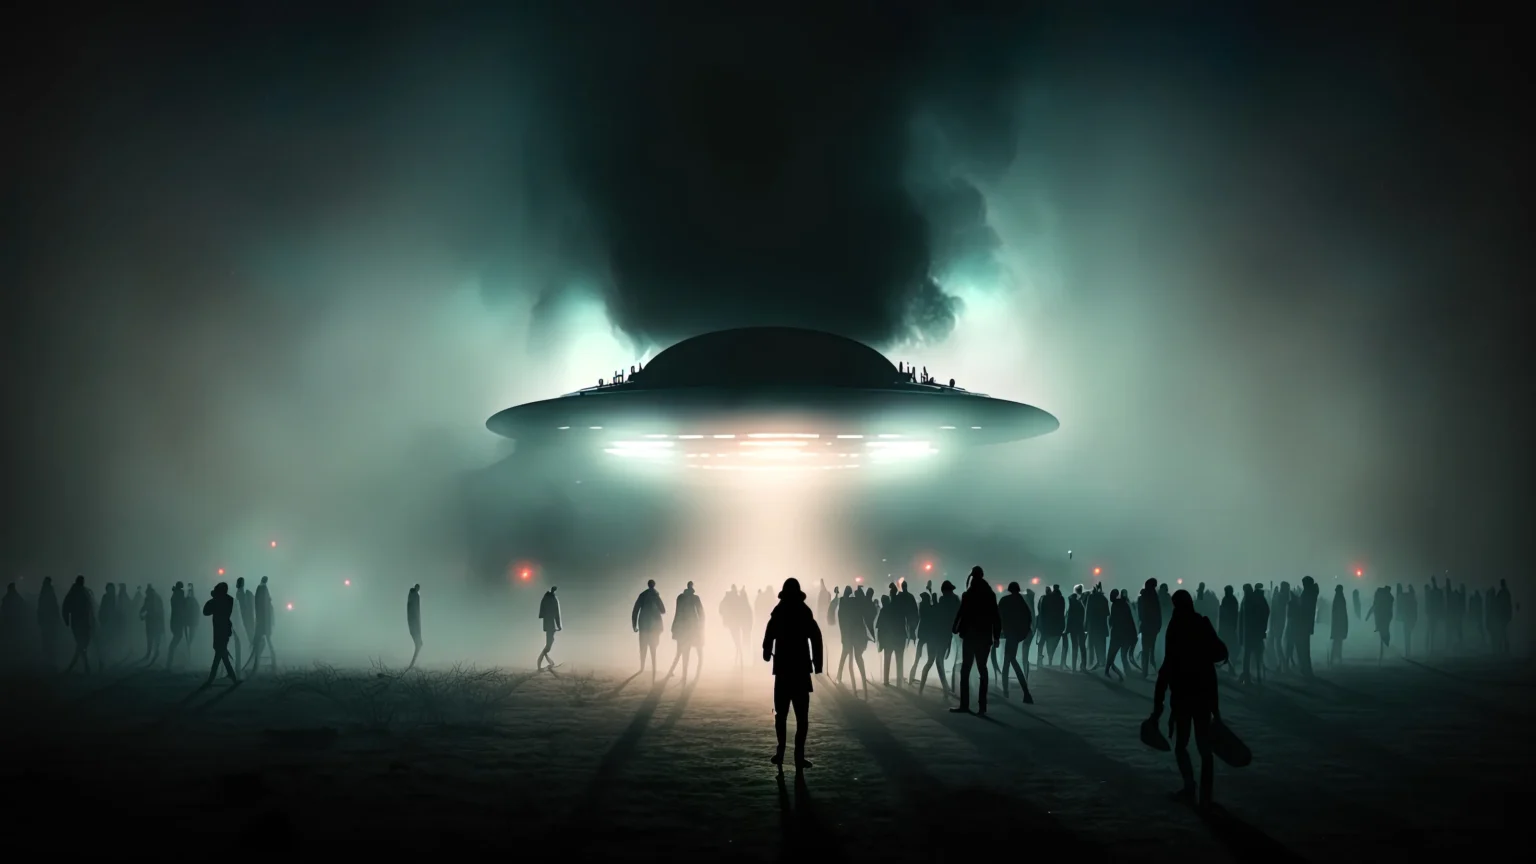 aliens-live-among-us-disguised-as-humans-harvard-study